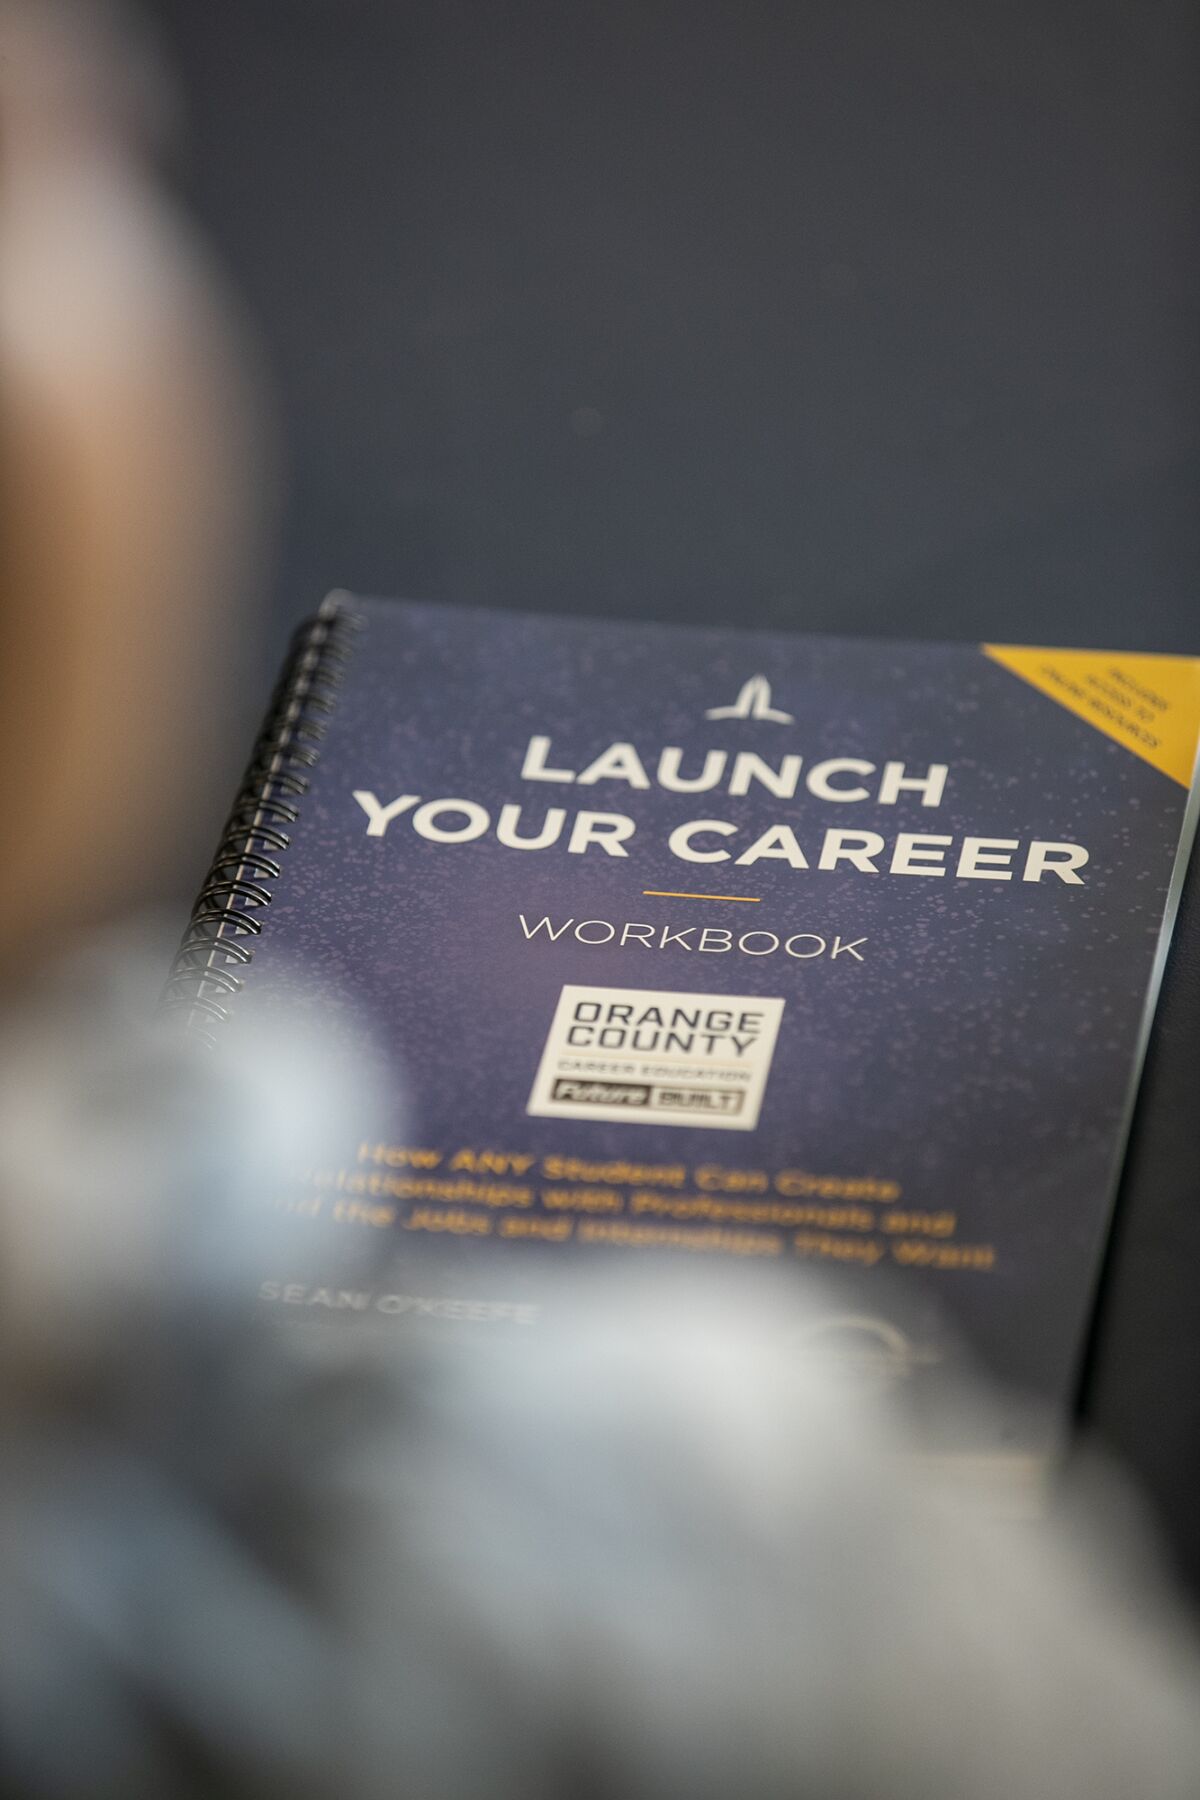  Orange Coast College is offering a career launch personalized career coaching program.